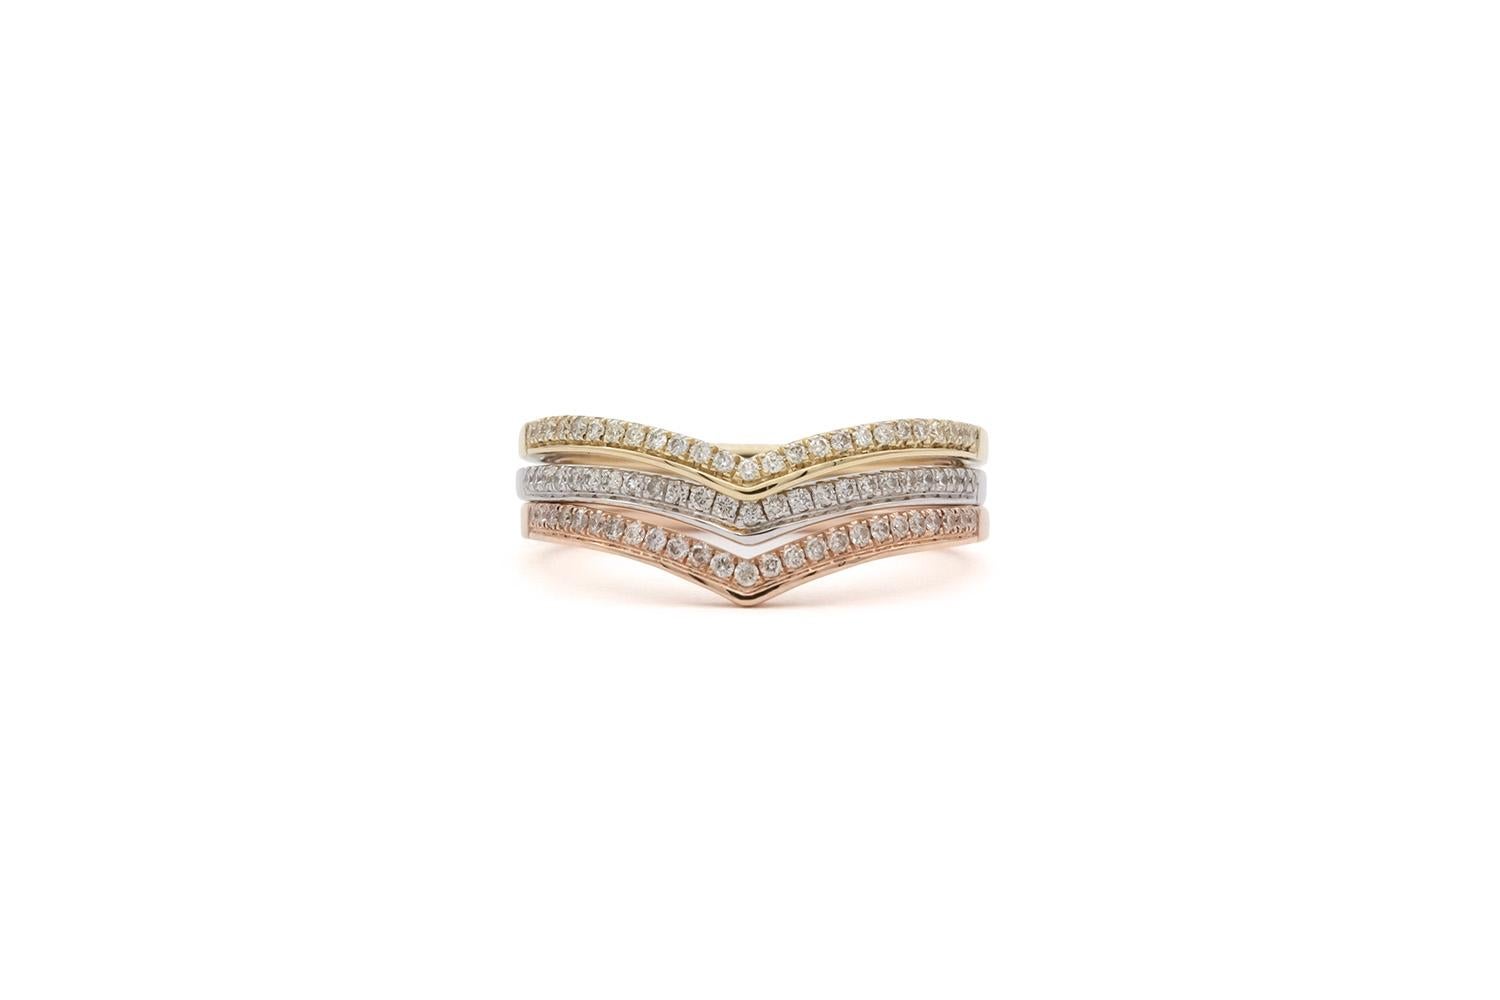 We are pleased to offer these Brand New 14k White Yellow & Rose Gold Diamond Chevron Stacking Fashion Rings. They feature 0.30ctw G/VS Round brilliant Cut Diamonds set in 14k gold. They are size 6.5 US and measures 1.50mm wide. The rings are brand